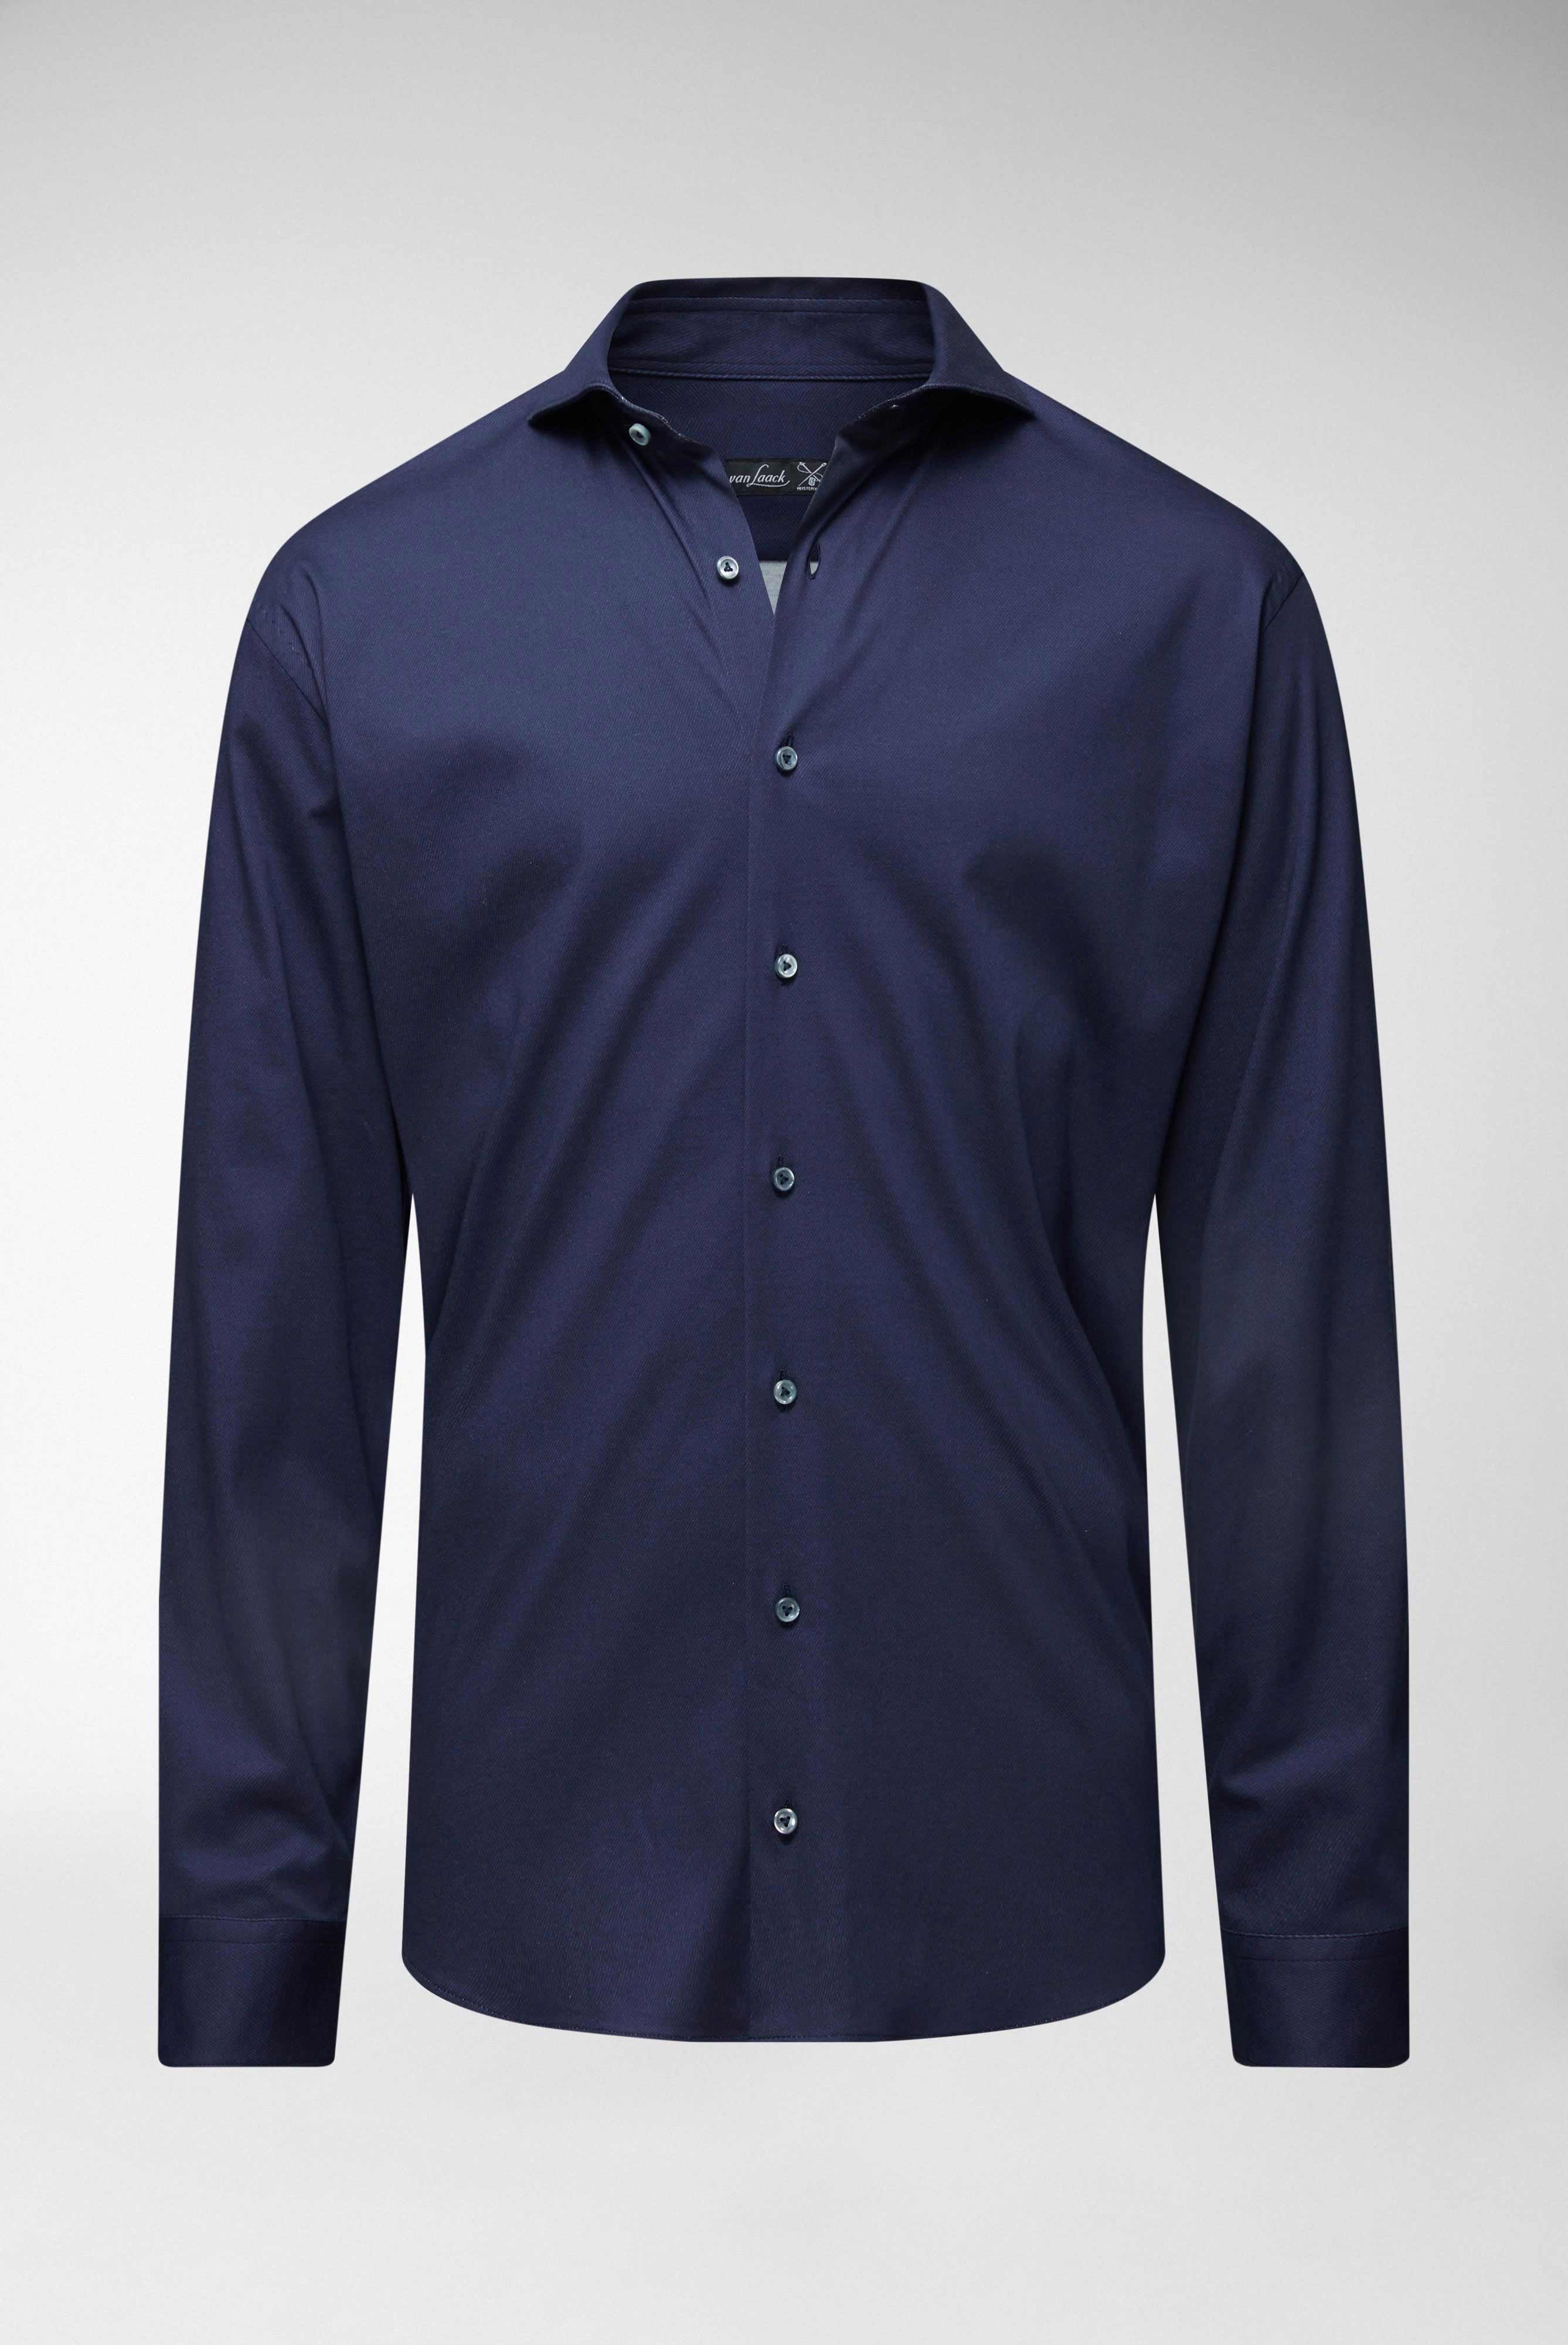 Casual Shirts+Jersey Shirt Twill Printed Tailor Fit+20.1683.UC.187749.690.XL